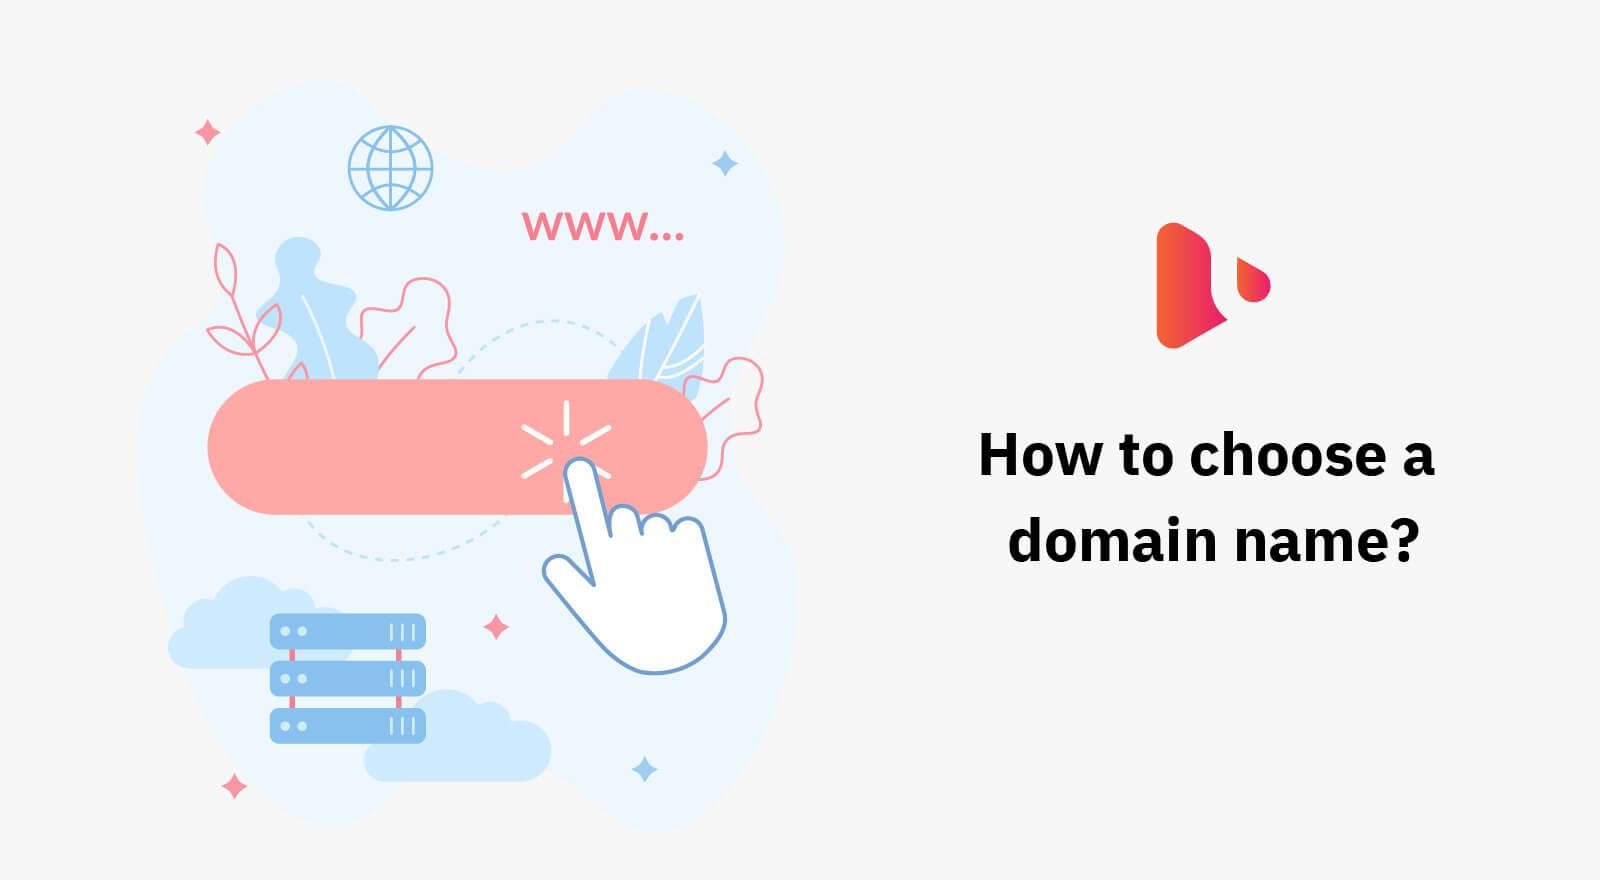 How to choose a domain name?